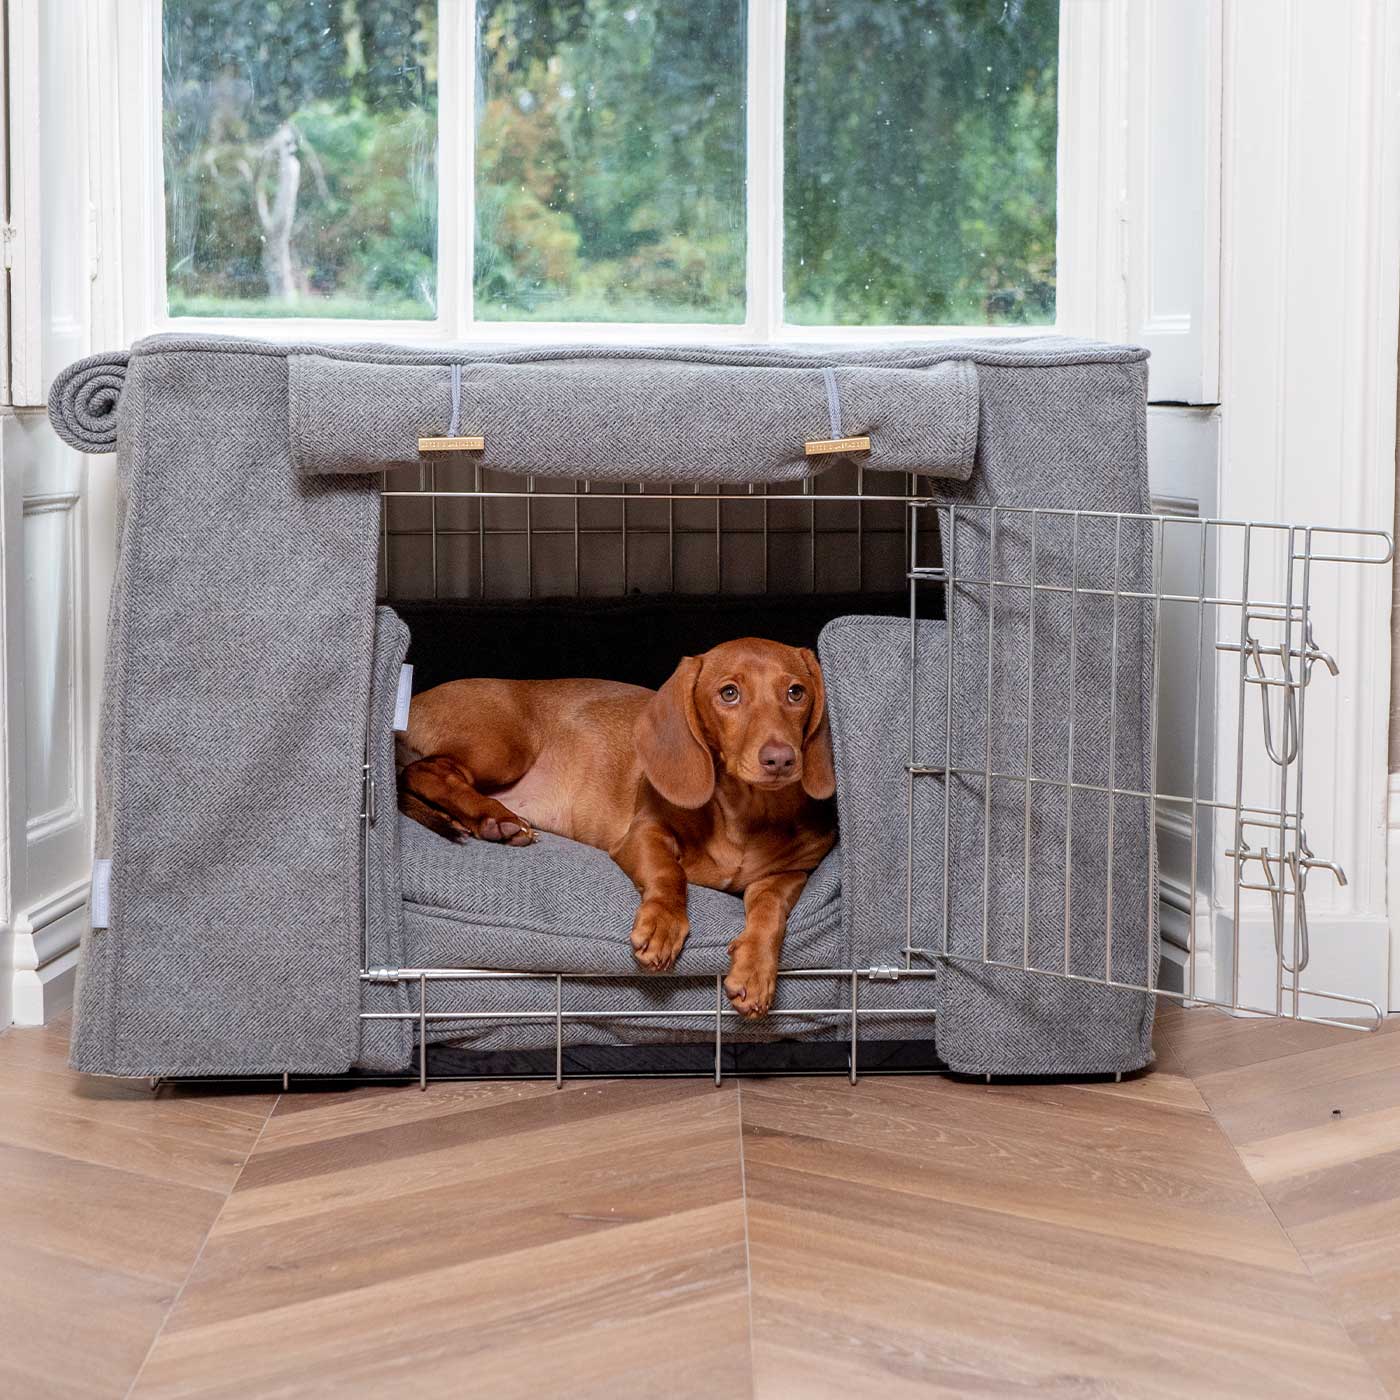 Luxury Heavy Duty Dog Crate, In Stunning Pewter Herringbone Tweed Crate Set, The Perfect Dog Crate Set For Building The Ultimate Pet Den! Dog Crate Cover Available To Personalise at Lords & Labradors